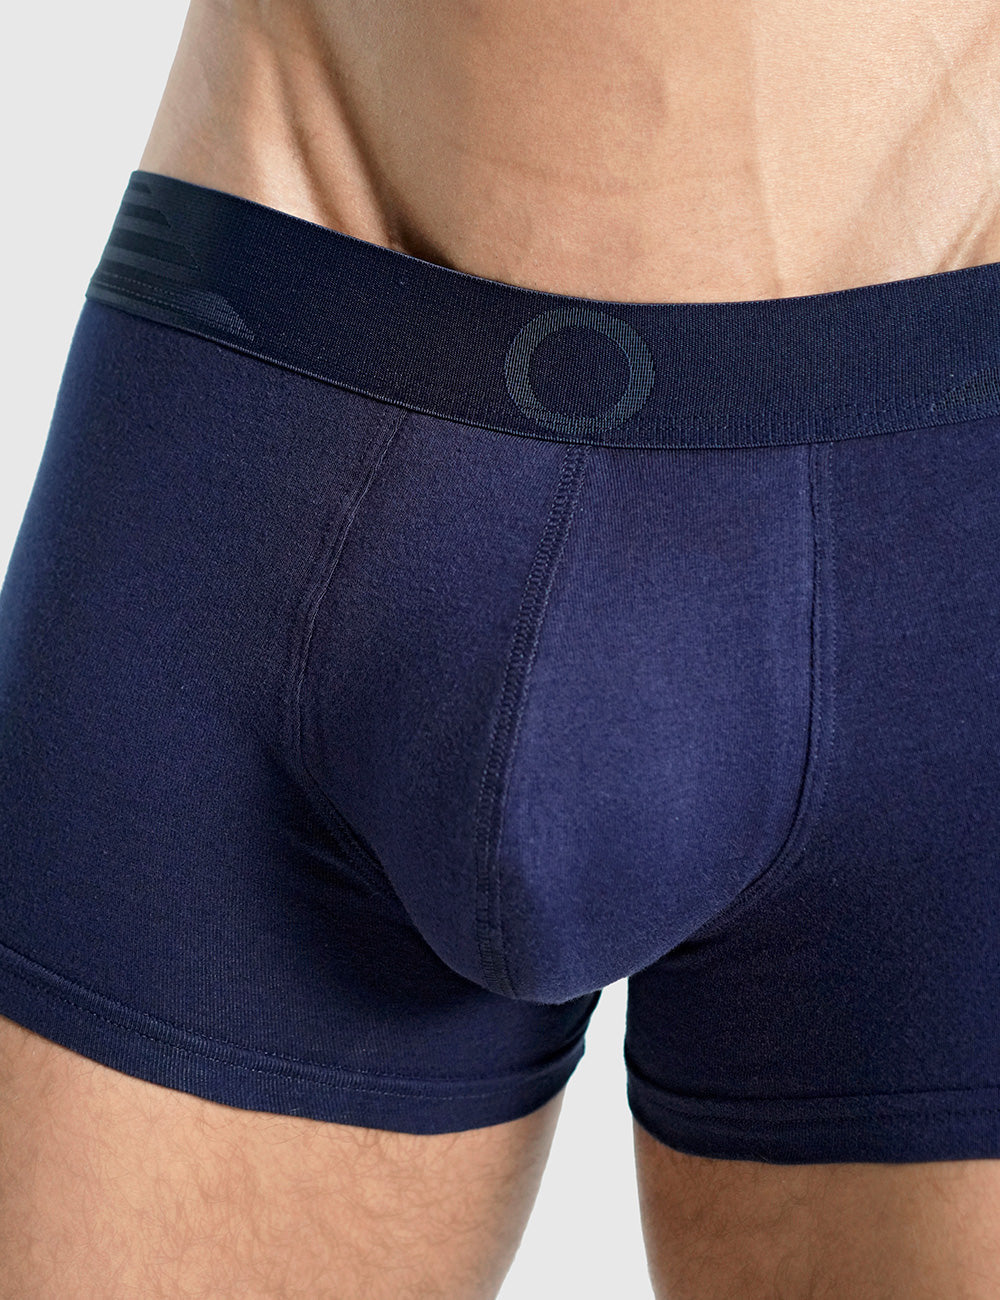 Padded Boxer Trunk + Smart Package Cup – GRAPEFRUIT